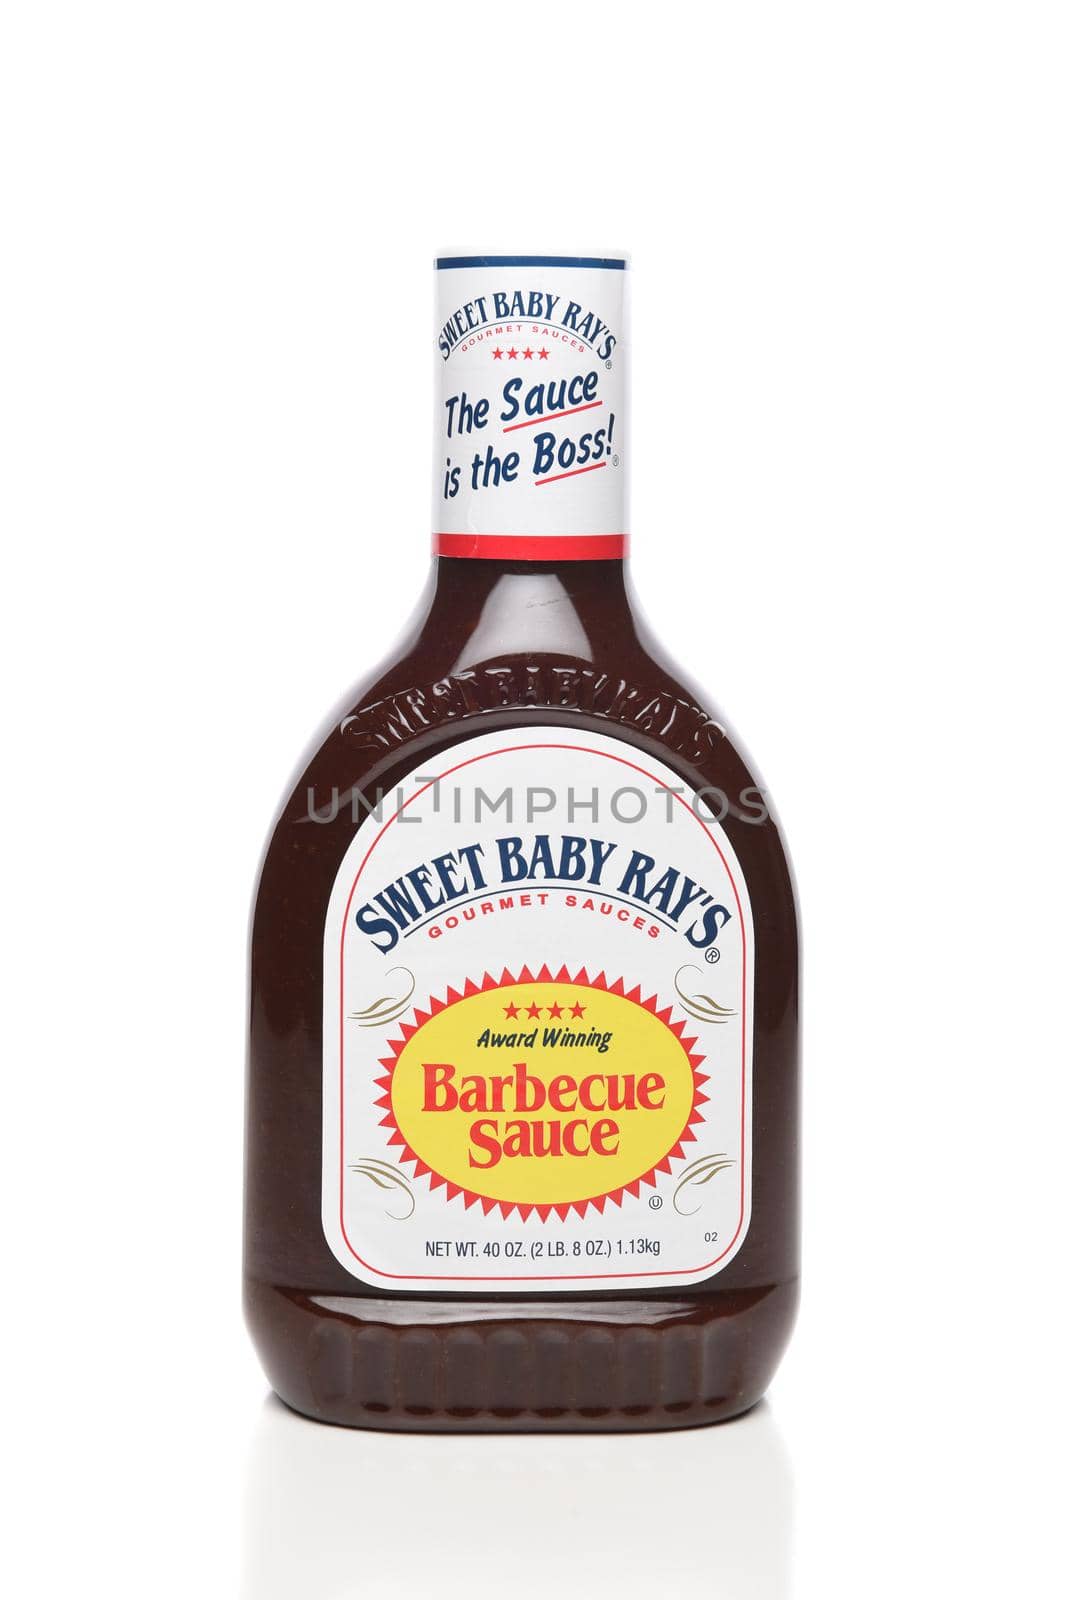 IRVINE, CALIFORNIA - 6 OCT 2020: A bottle of Sweet Baby Rays Barbecue Sauce.